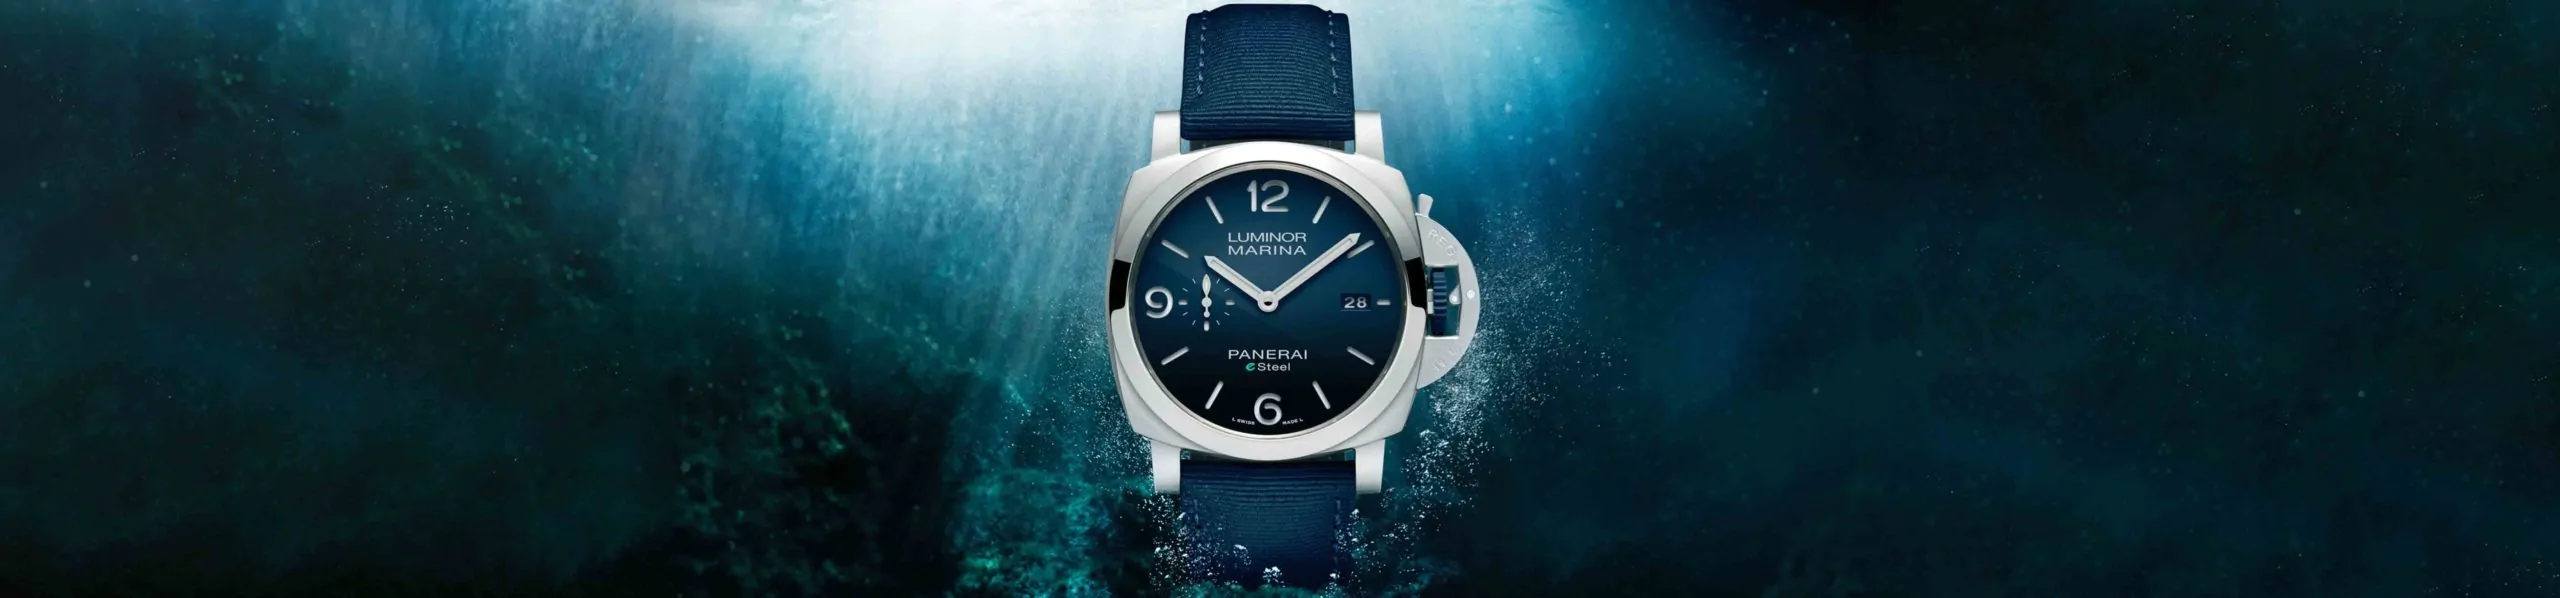 Panerai Affirms Sustainability Ethos at Watches and Wonders